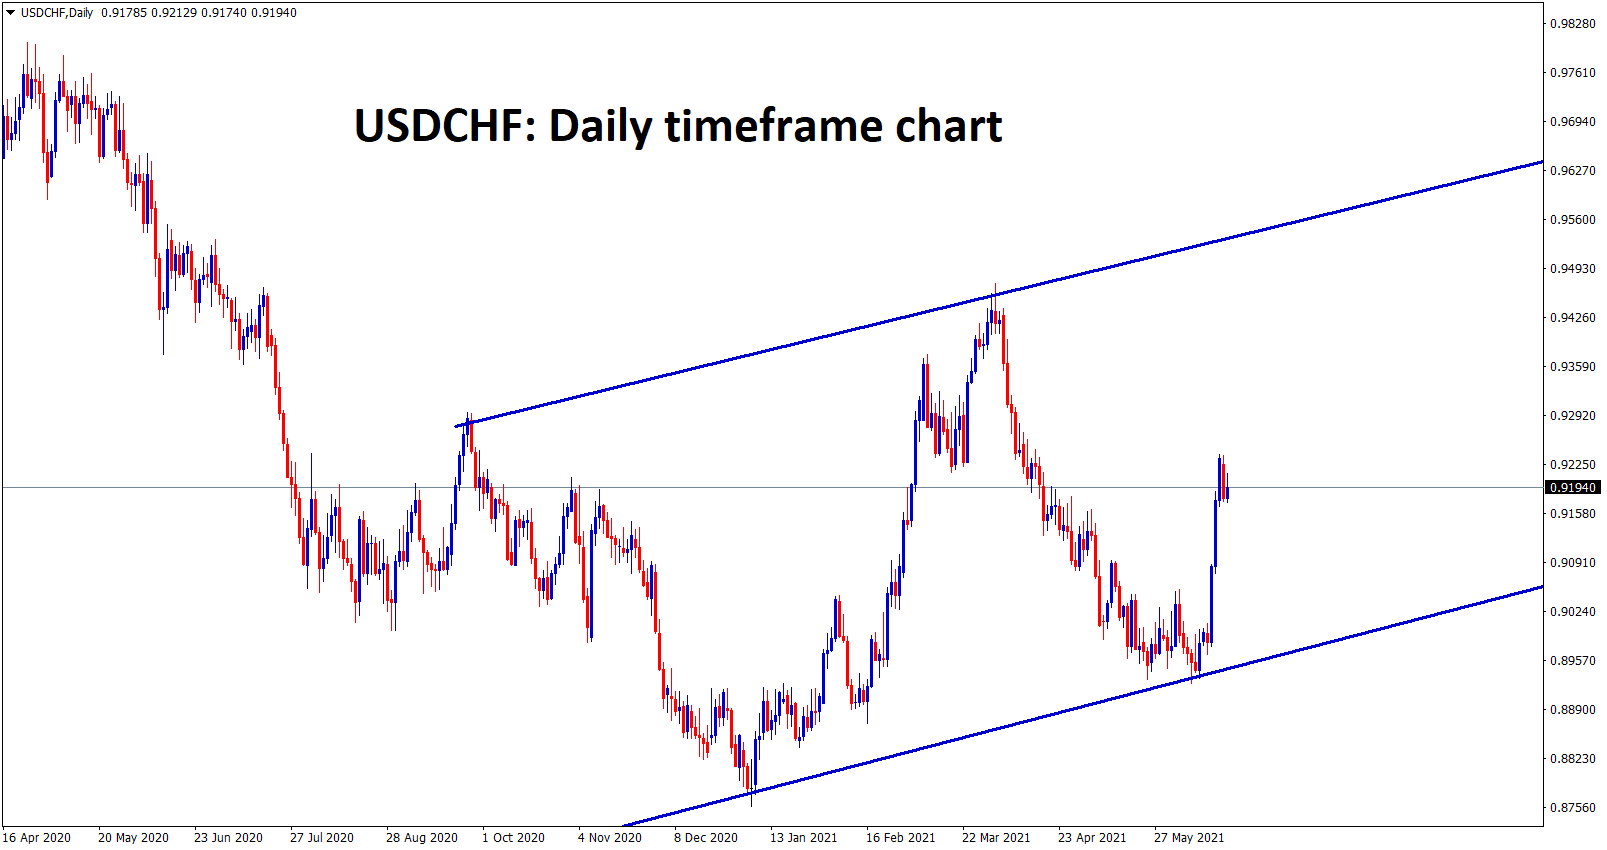 USDCHF is moving in a bigger range after bouncing back from the higher low